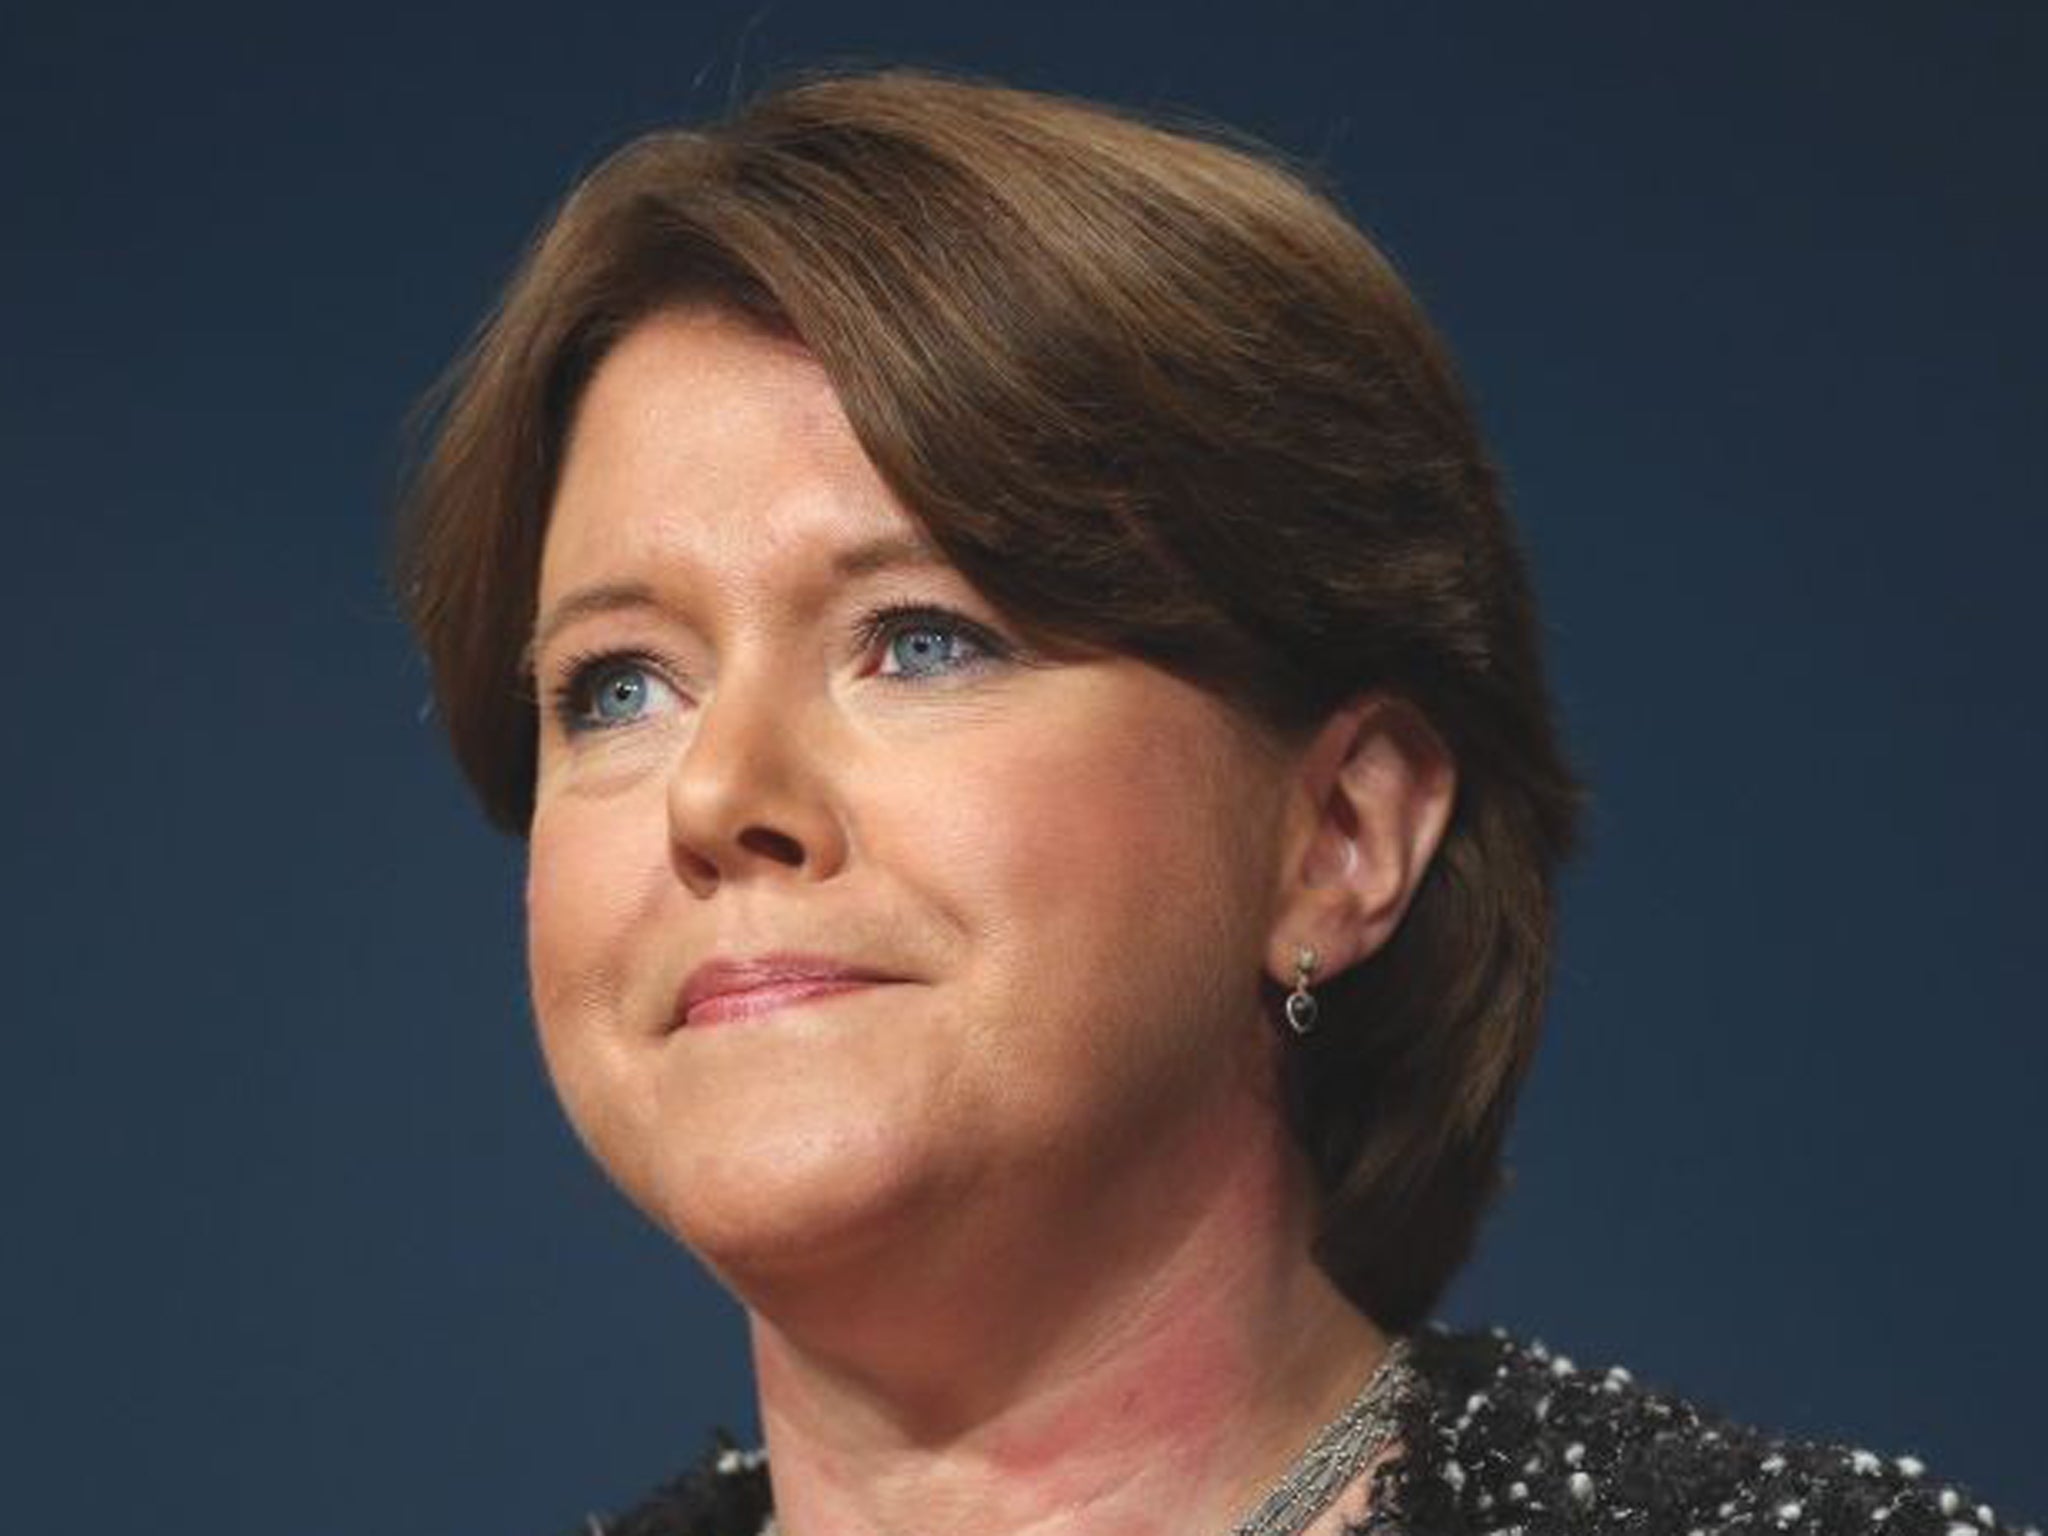 Maria Miller is to have her expenses investigated by the Parliamentary sleaze watchdog